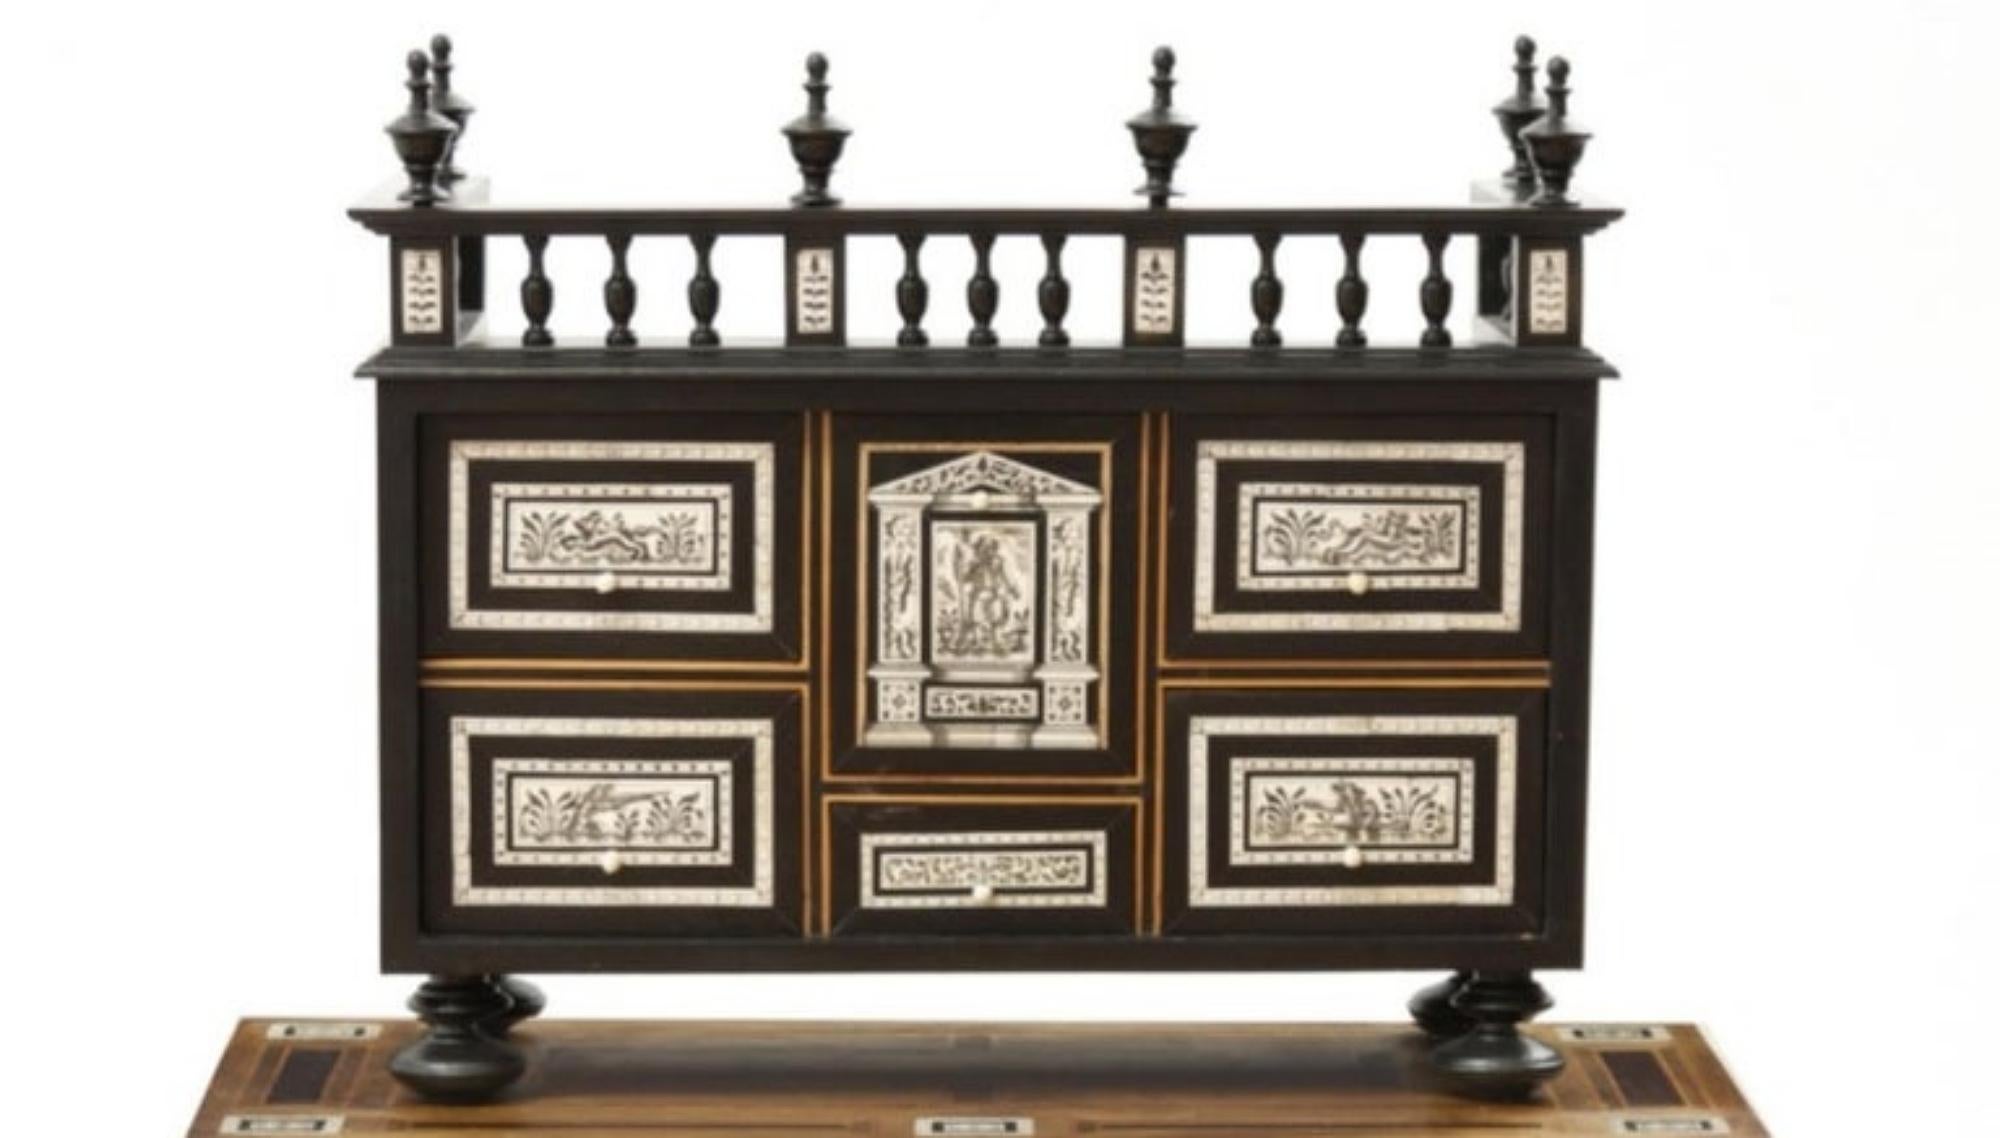 Spanish Bargueño with table in mahogany, walnut and ebonized wood with bone inlays representing different hunting scenes and animals on the central door. Interior with 4 drawers and finished off with a balustrade. Table with lentil legs and iron